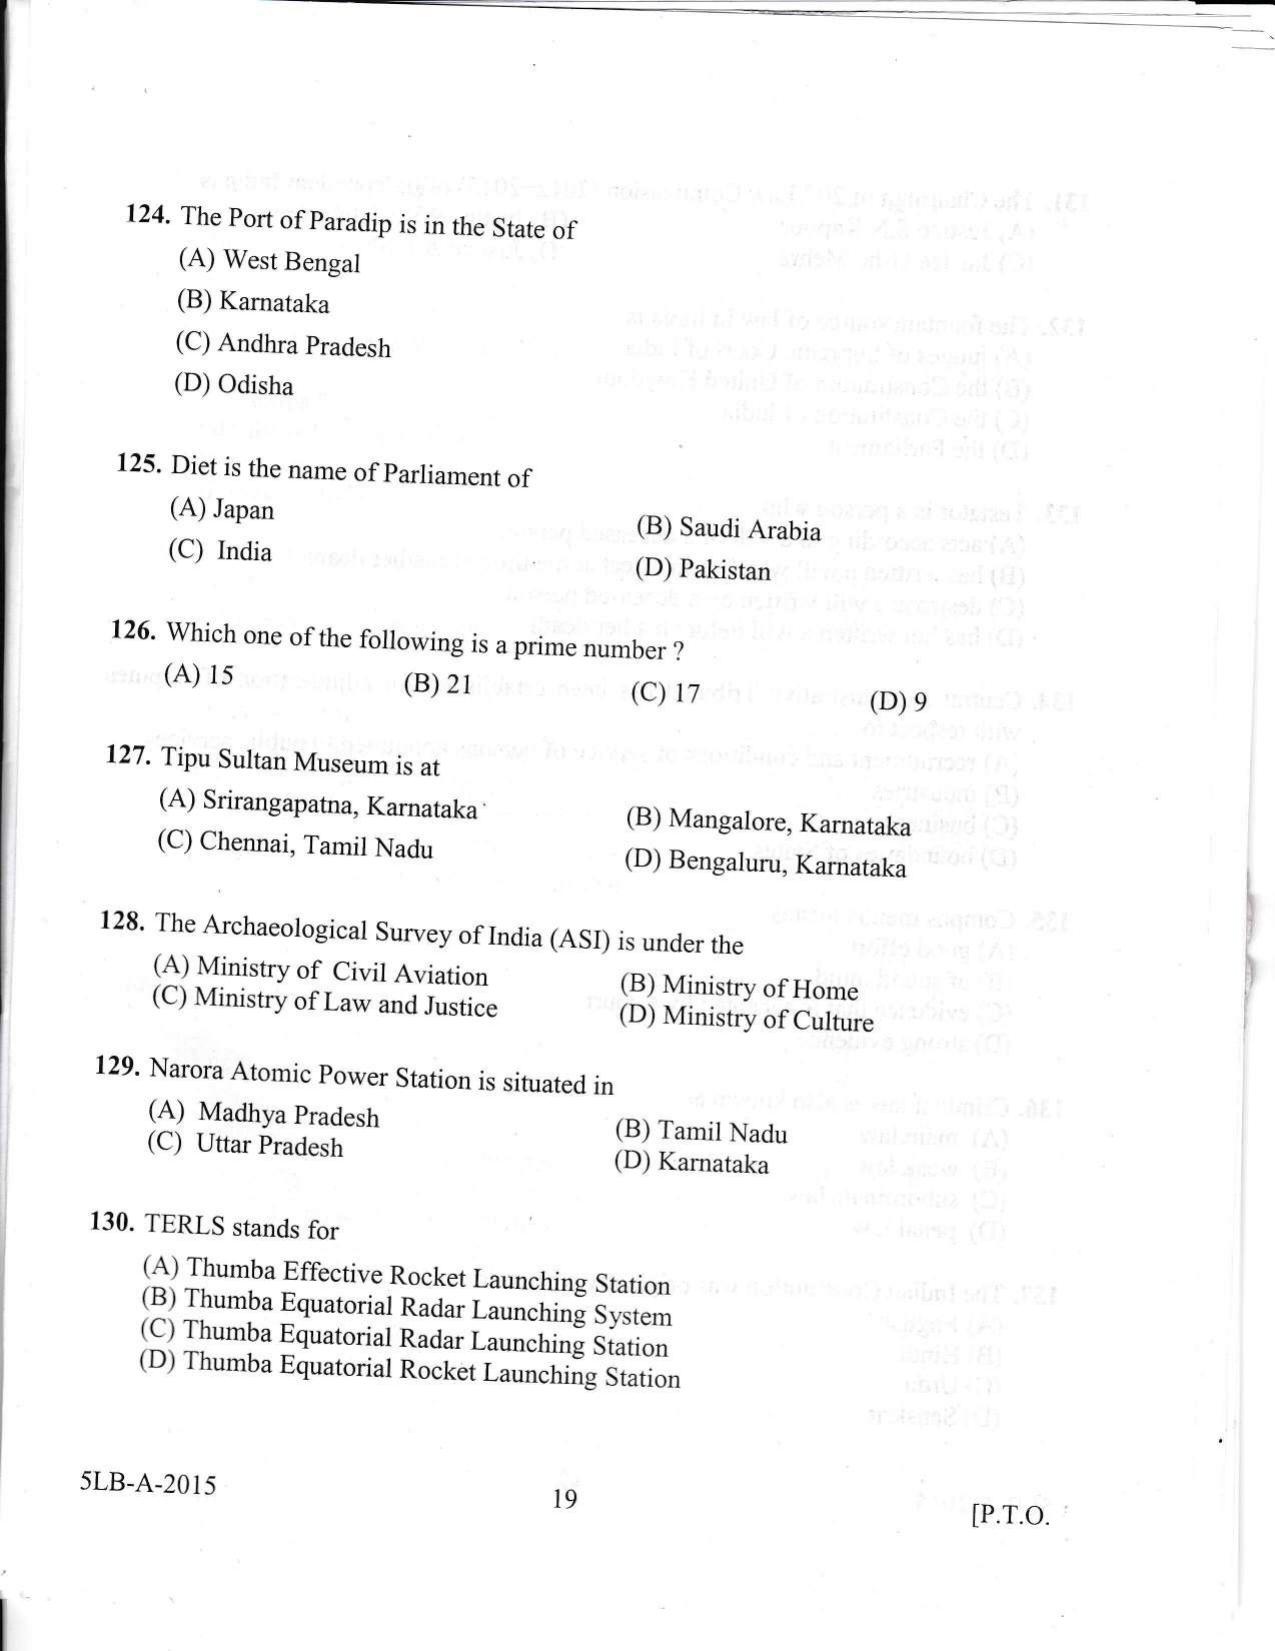 KLEE 5 Year LLB Exam 2015 Question Paper - Page 19